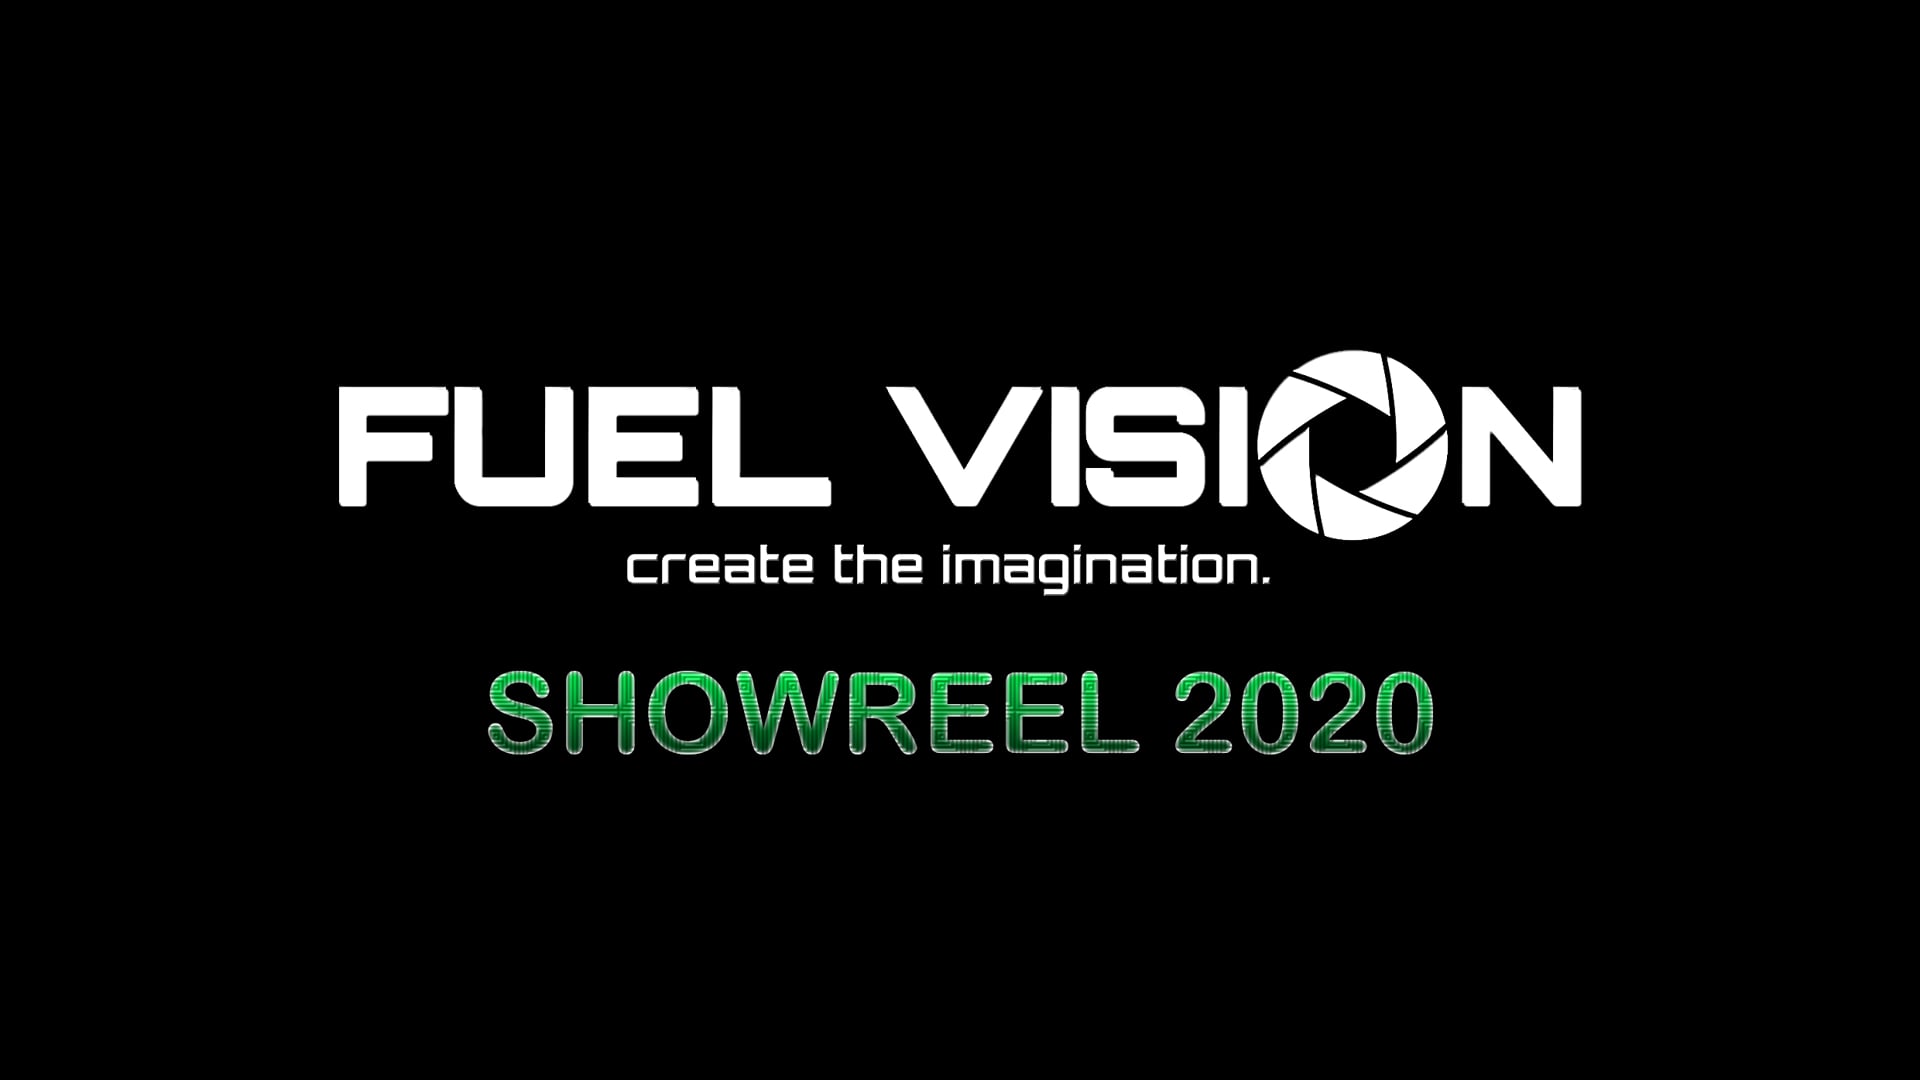 Fuel Vision Showreel 2020 - [Official Full HD Video] (2020)